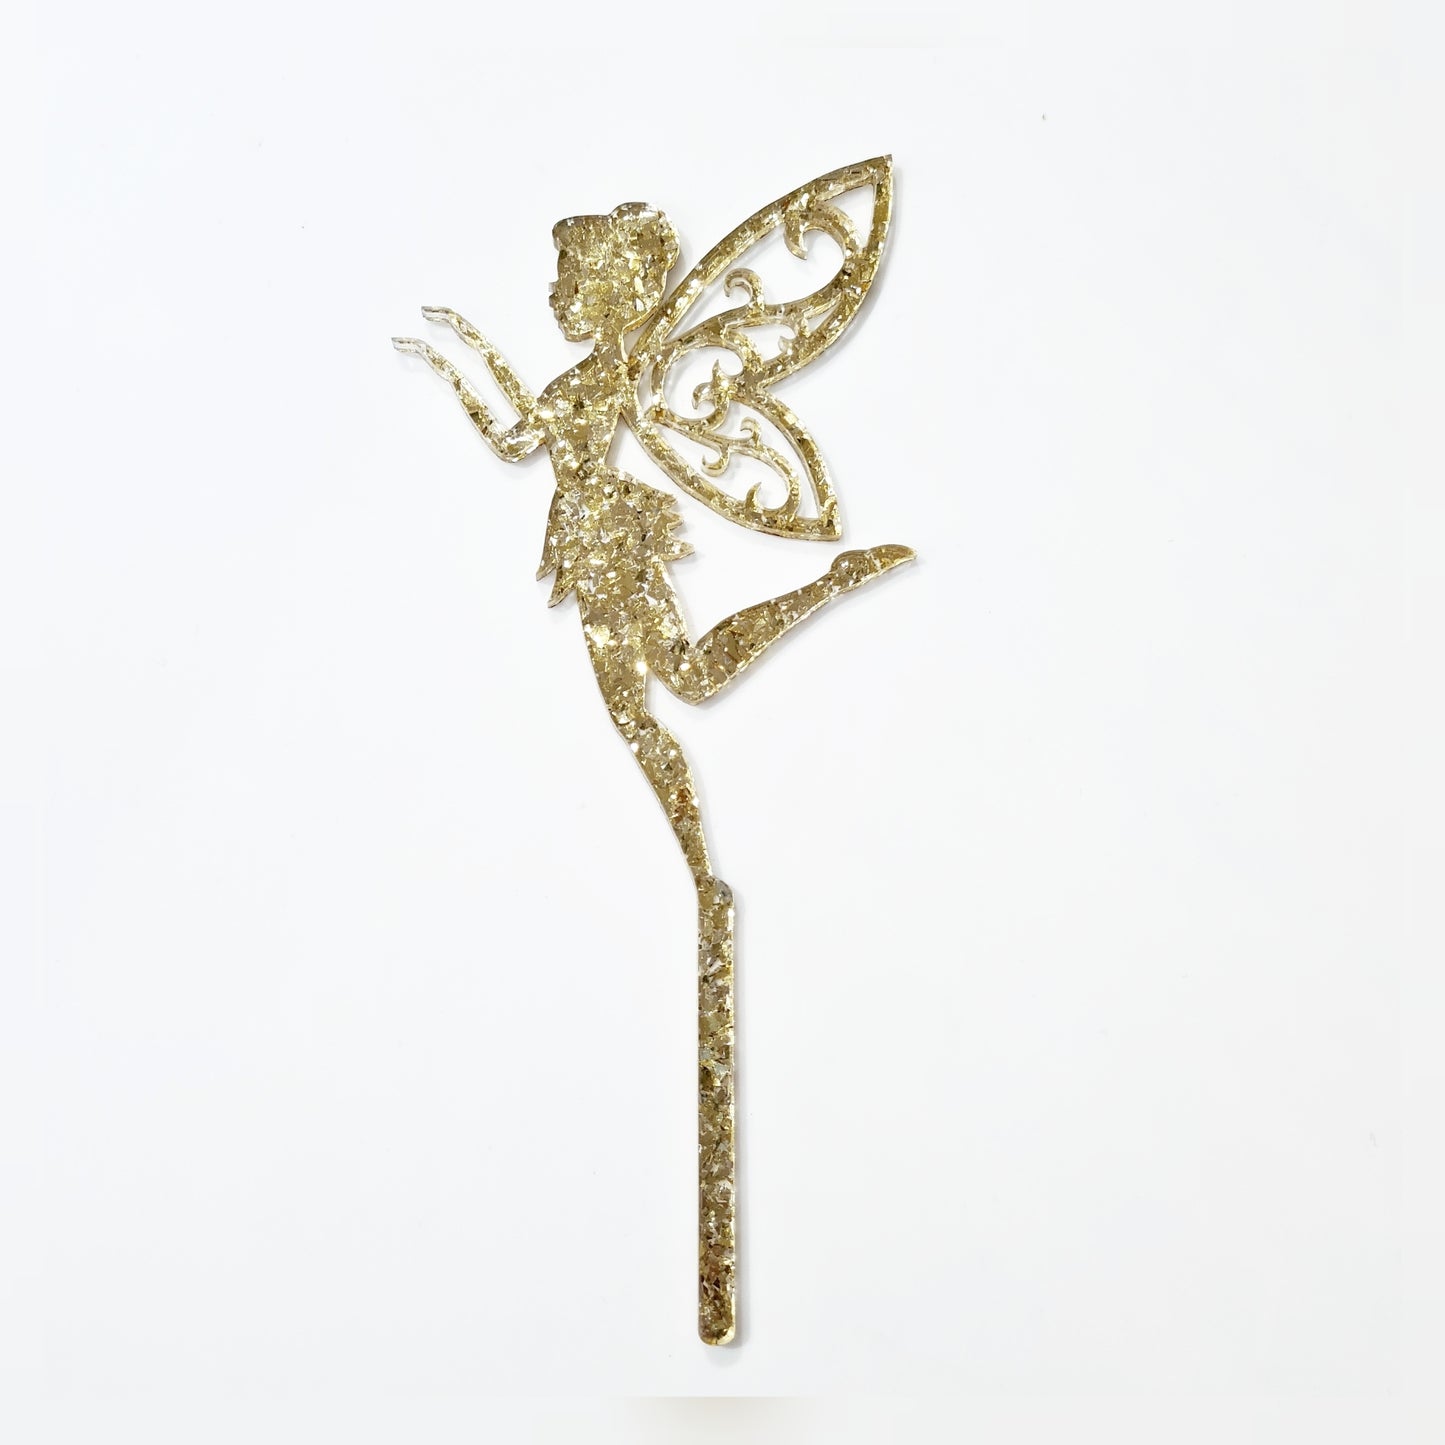 Fairy Cake Topper with Detailed Wings